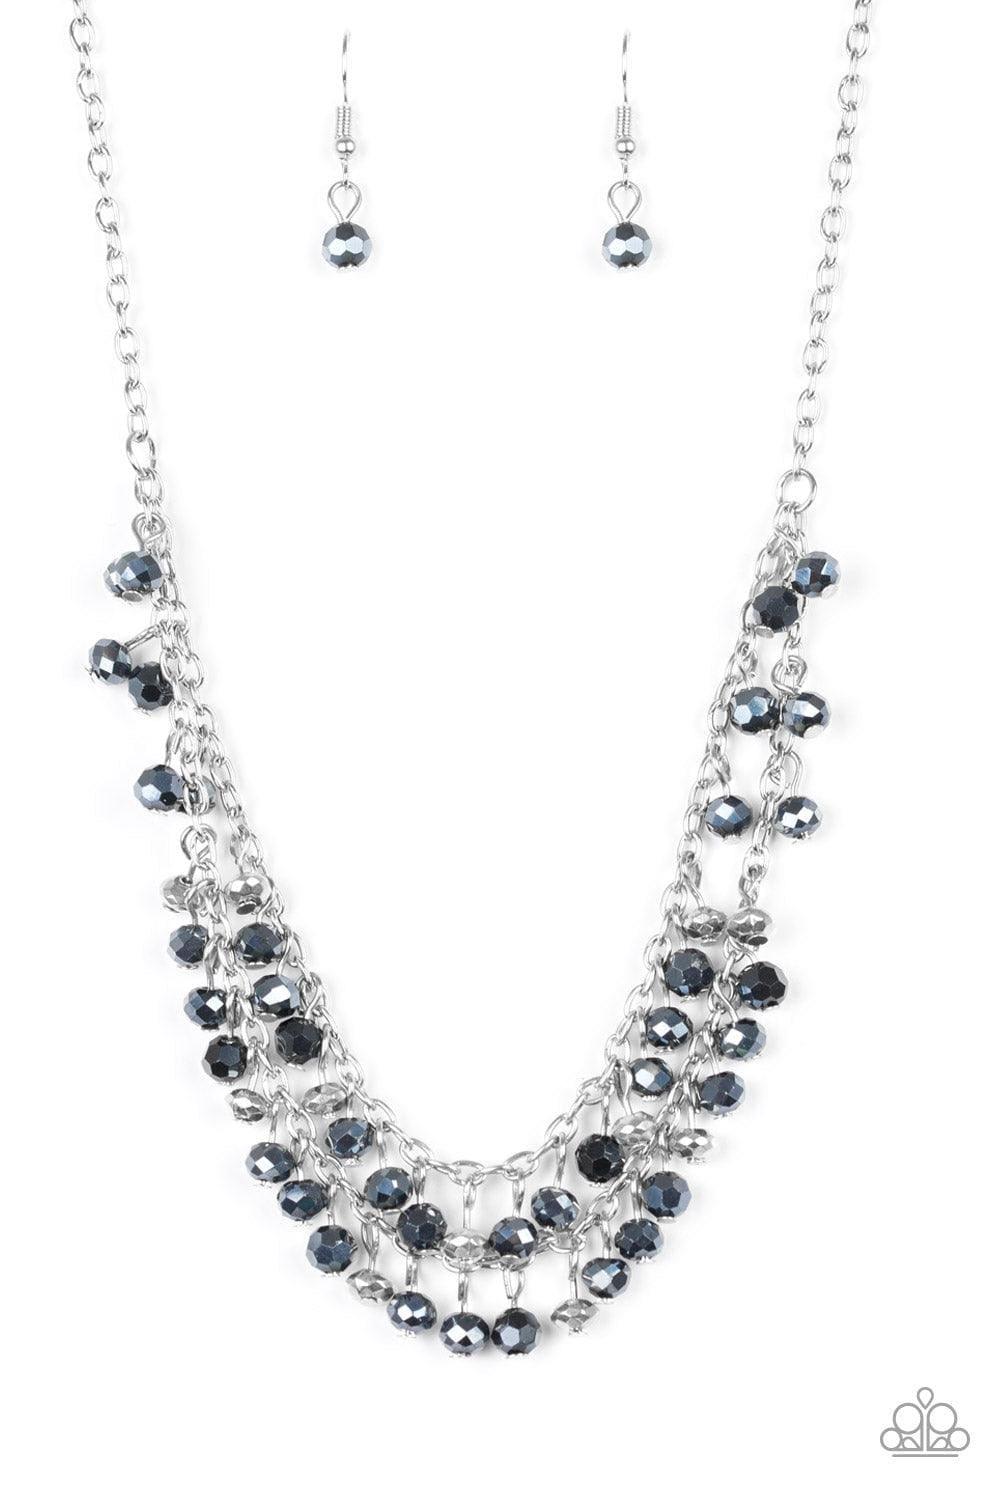 Paparazzi Accessories - So In Season - Blue Necklace - Bling by JessieK